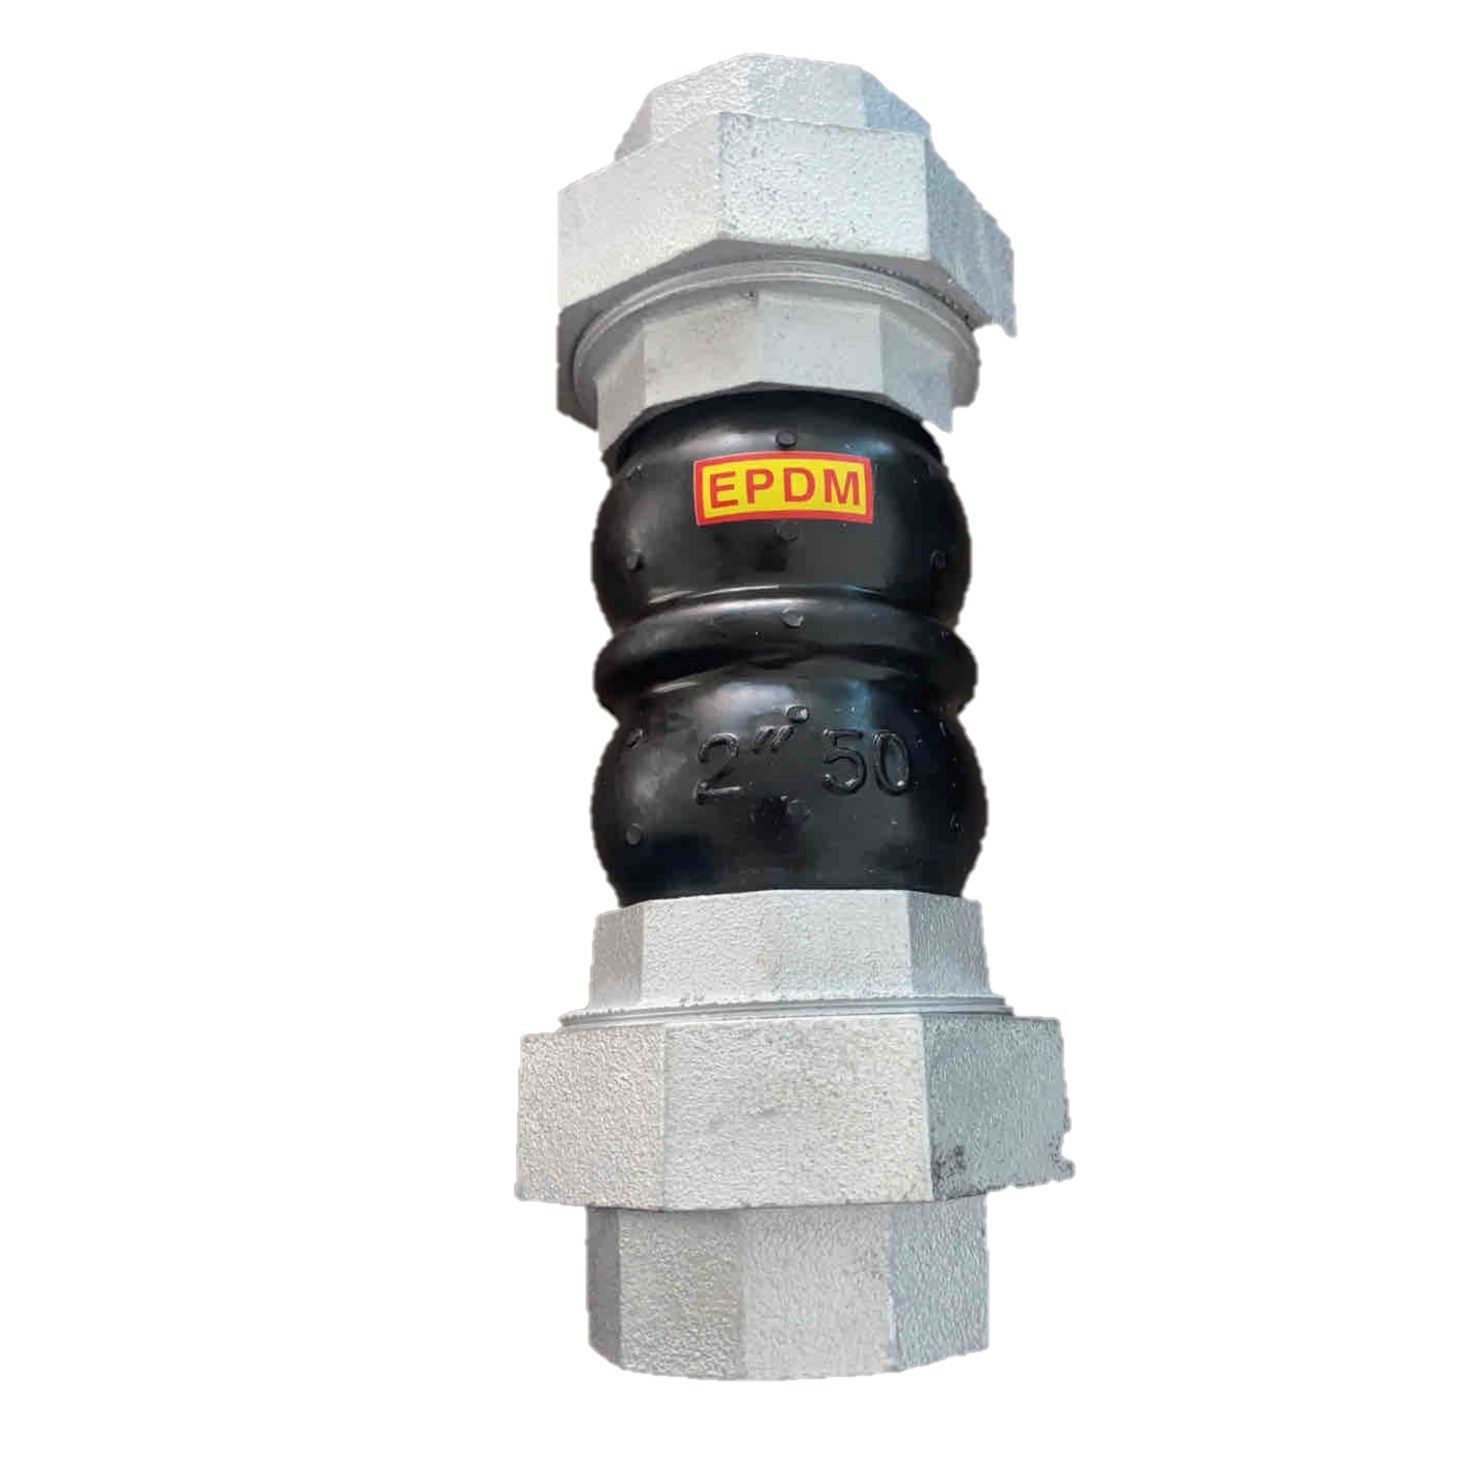 EPDM Threaded Rubber Flexible Joint Union Connection